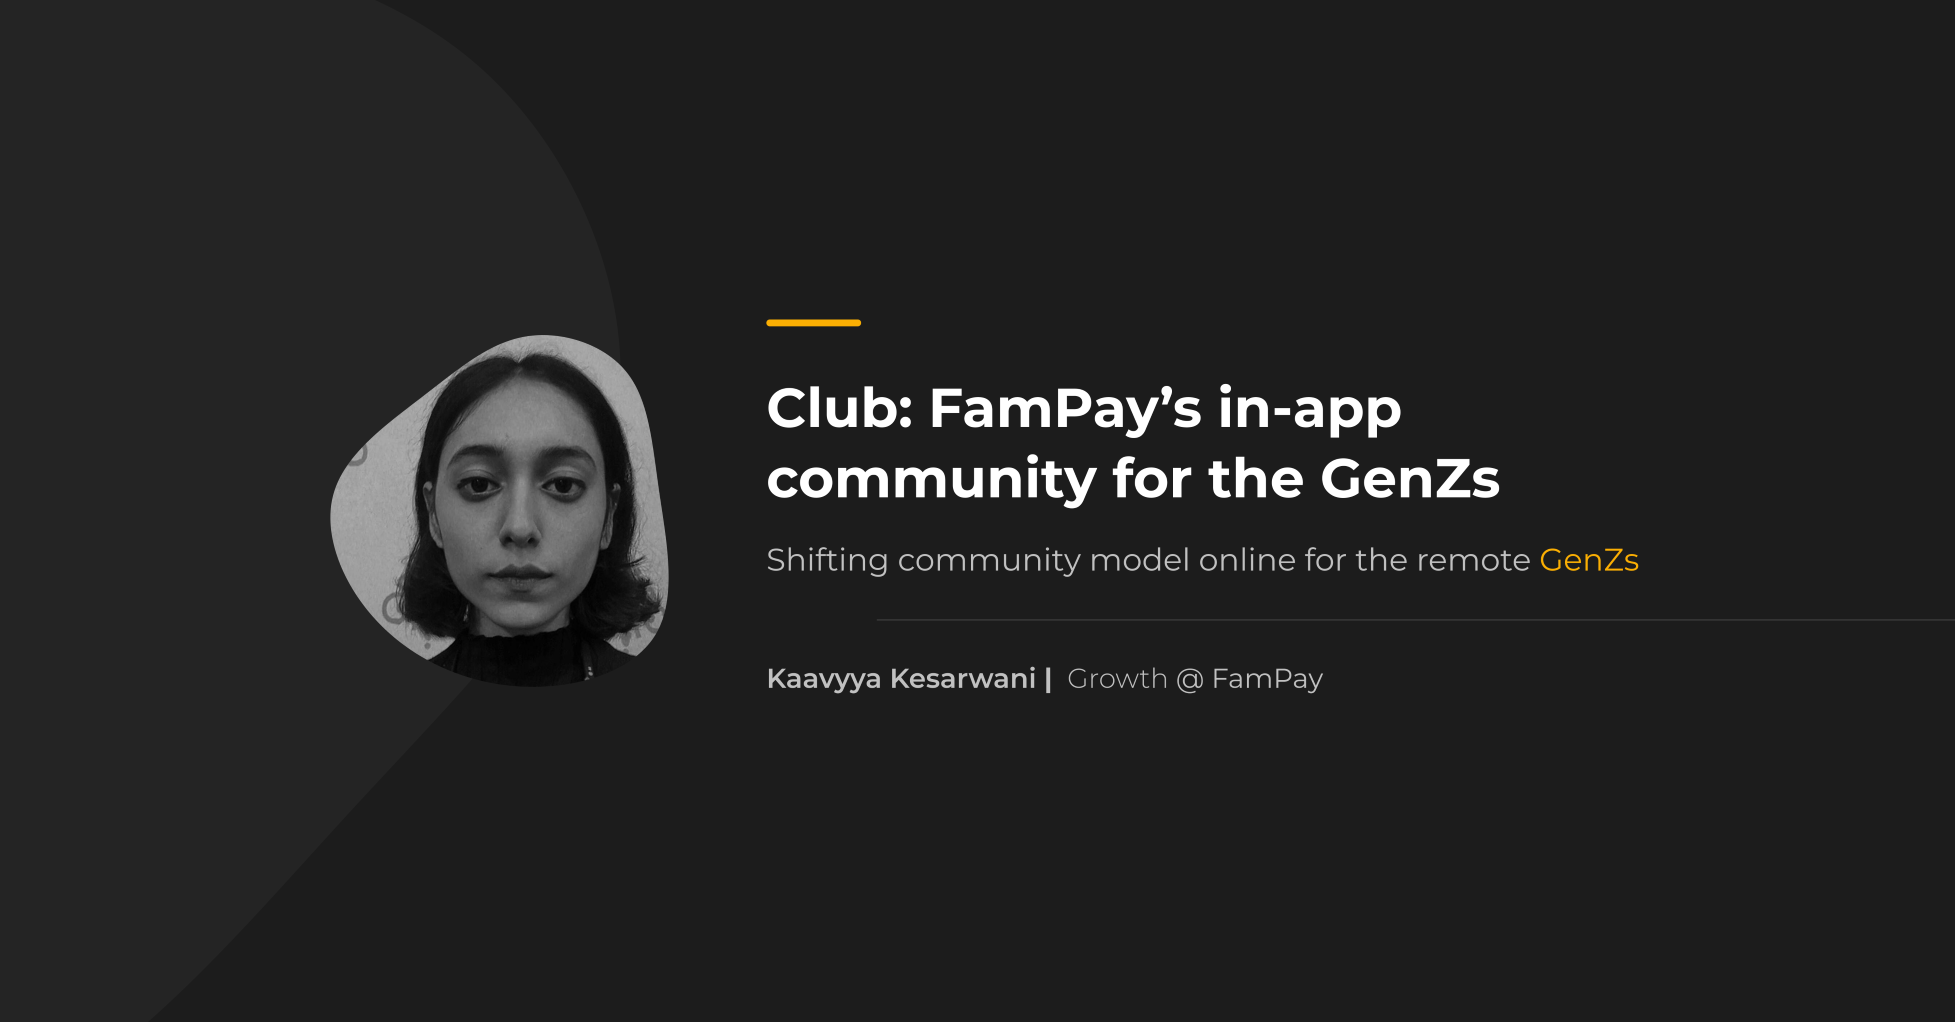 What are the perks of using FamPay? 😍